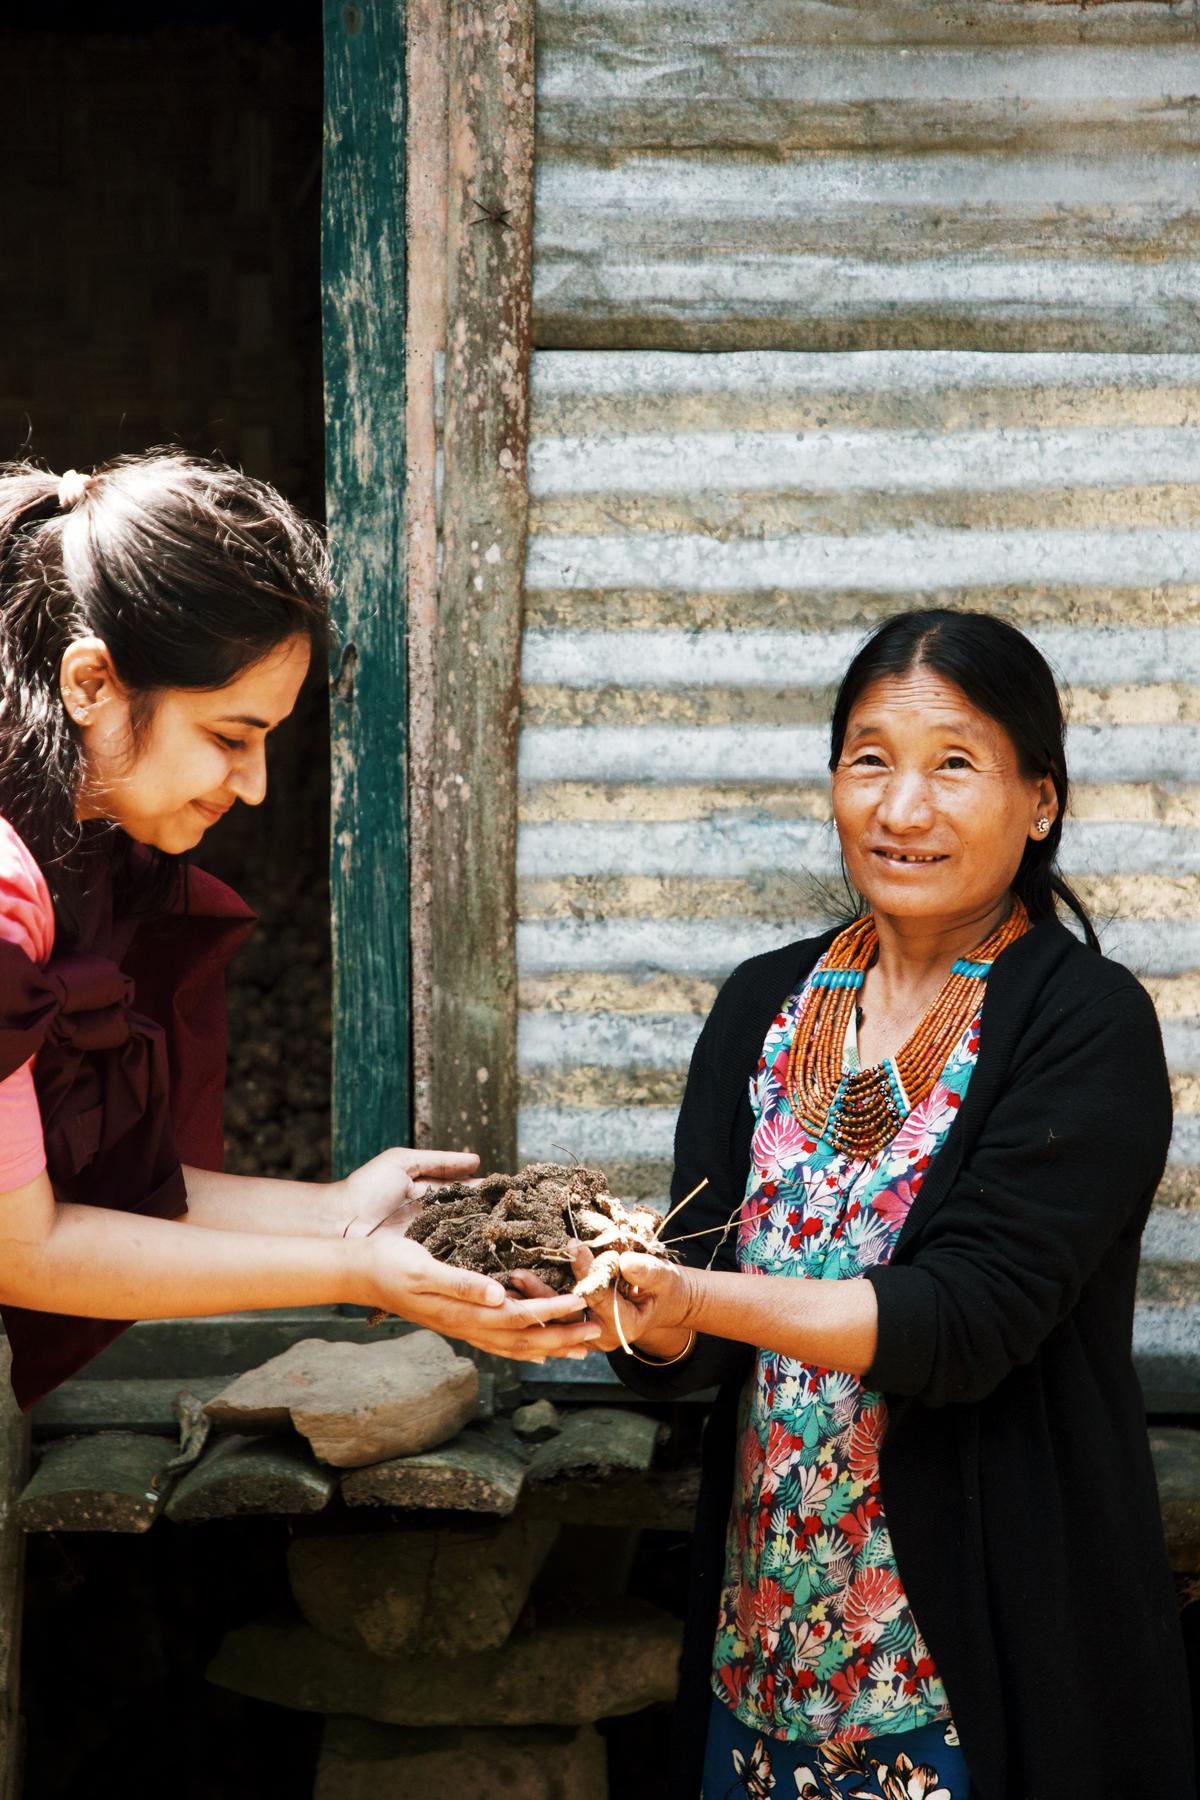 Chef Vanshika Bhatia of OMO Cafe with a local in Mon district, Nagaland